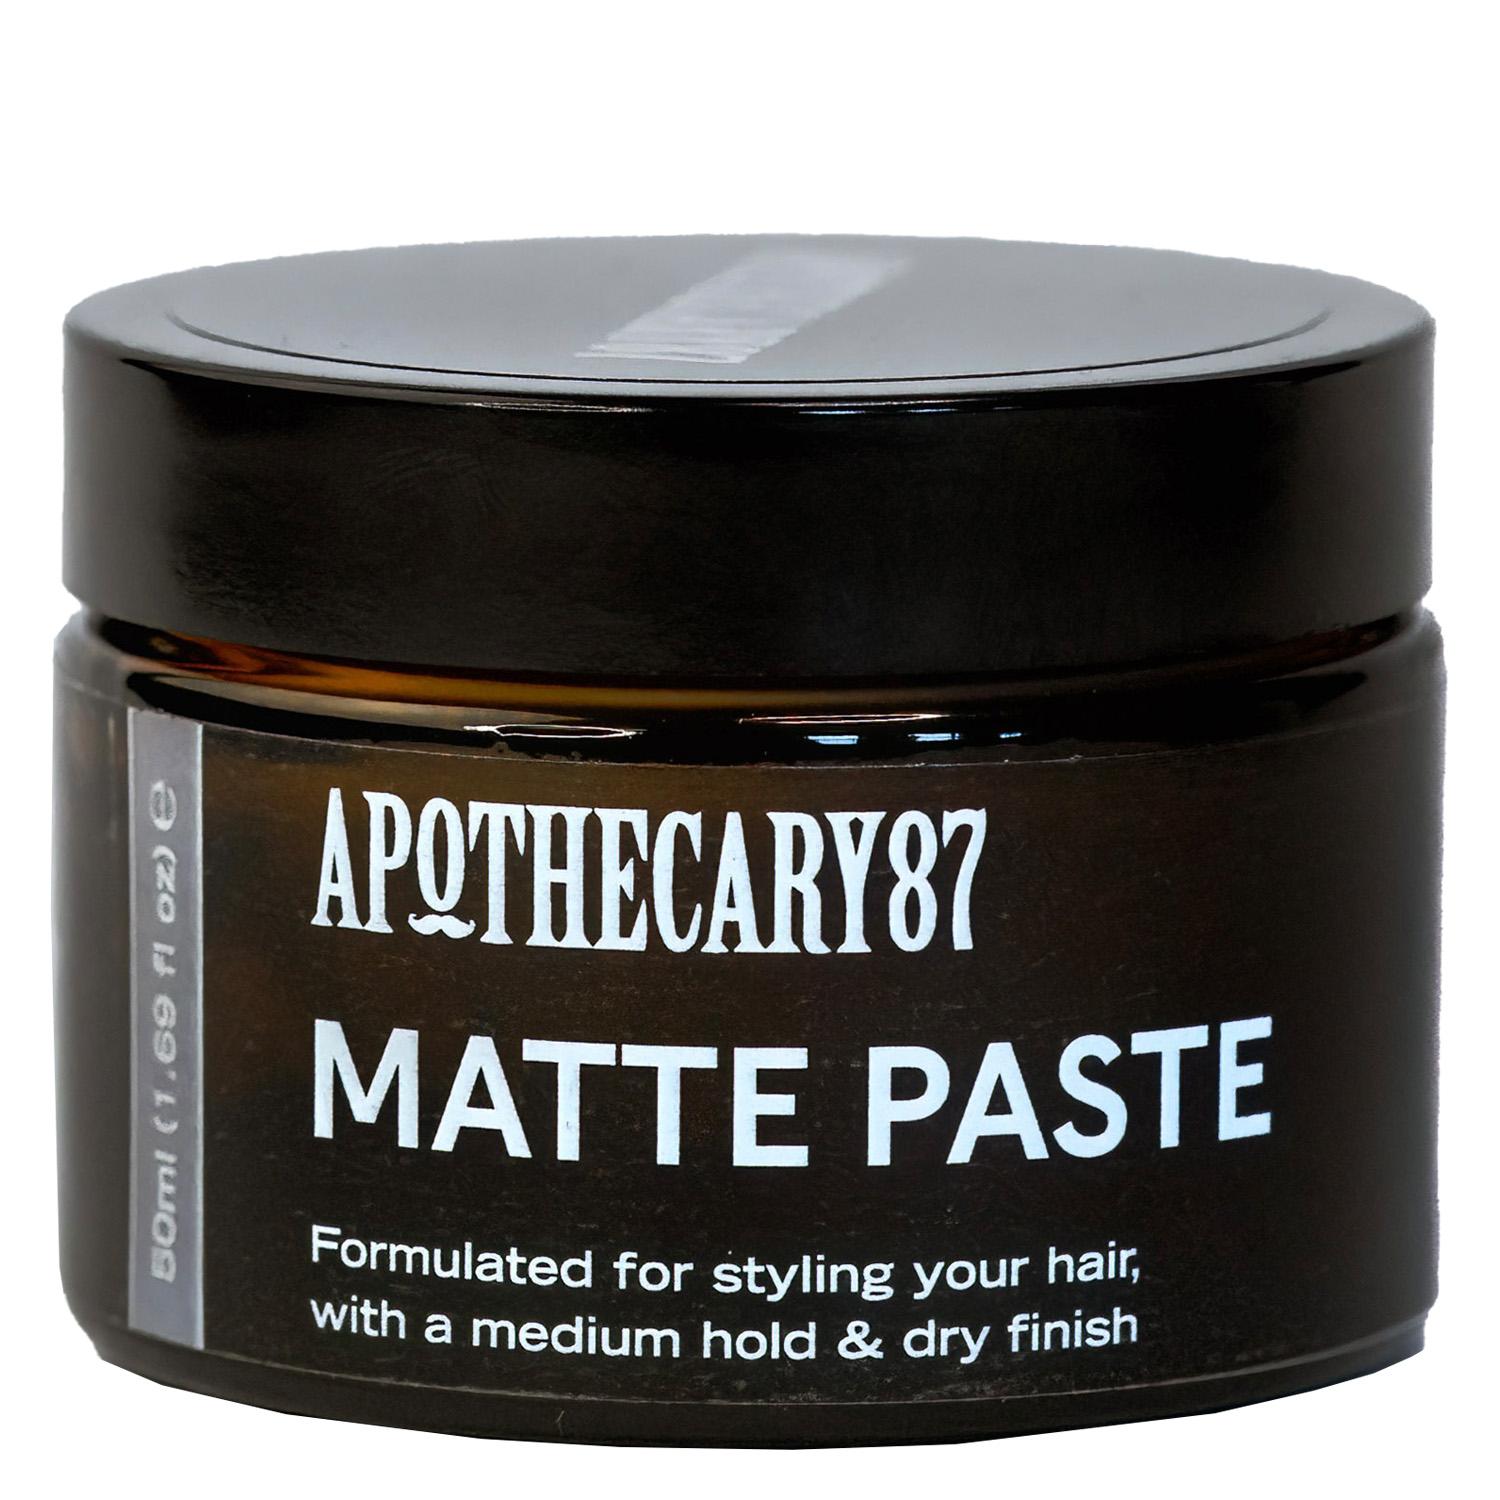 Apothecary87 Grooming - Matte Paste